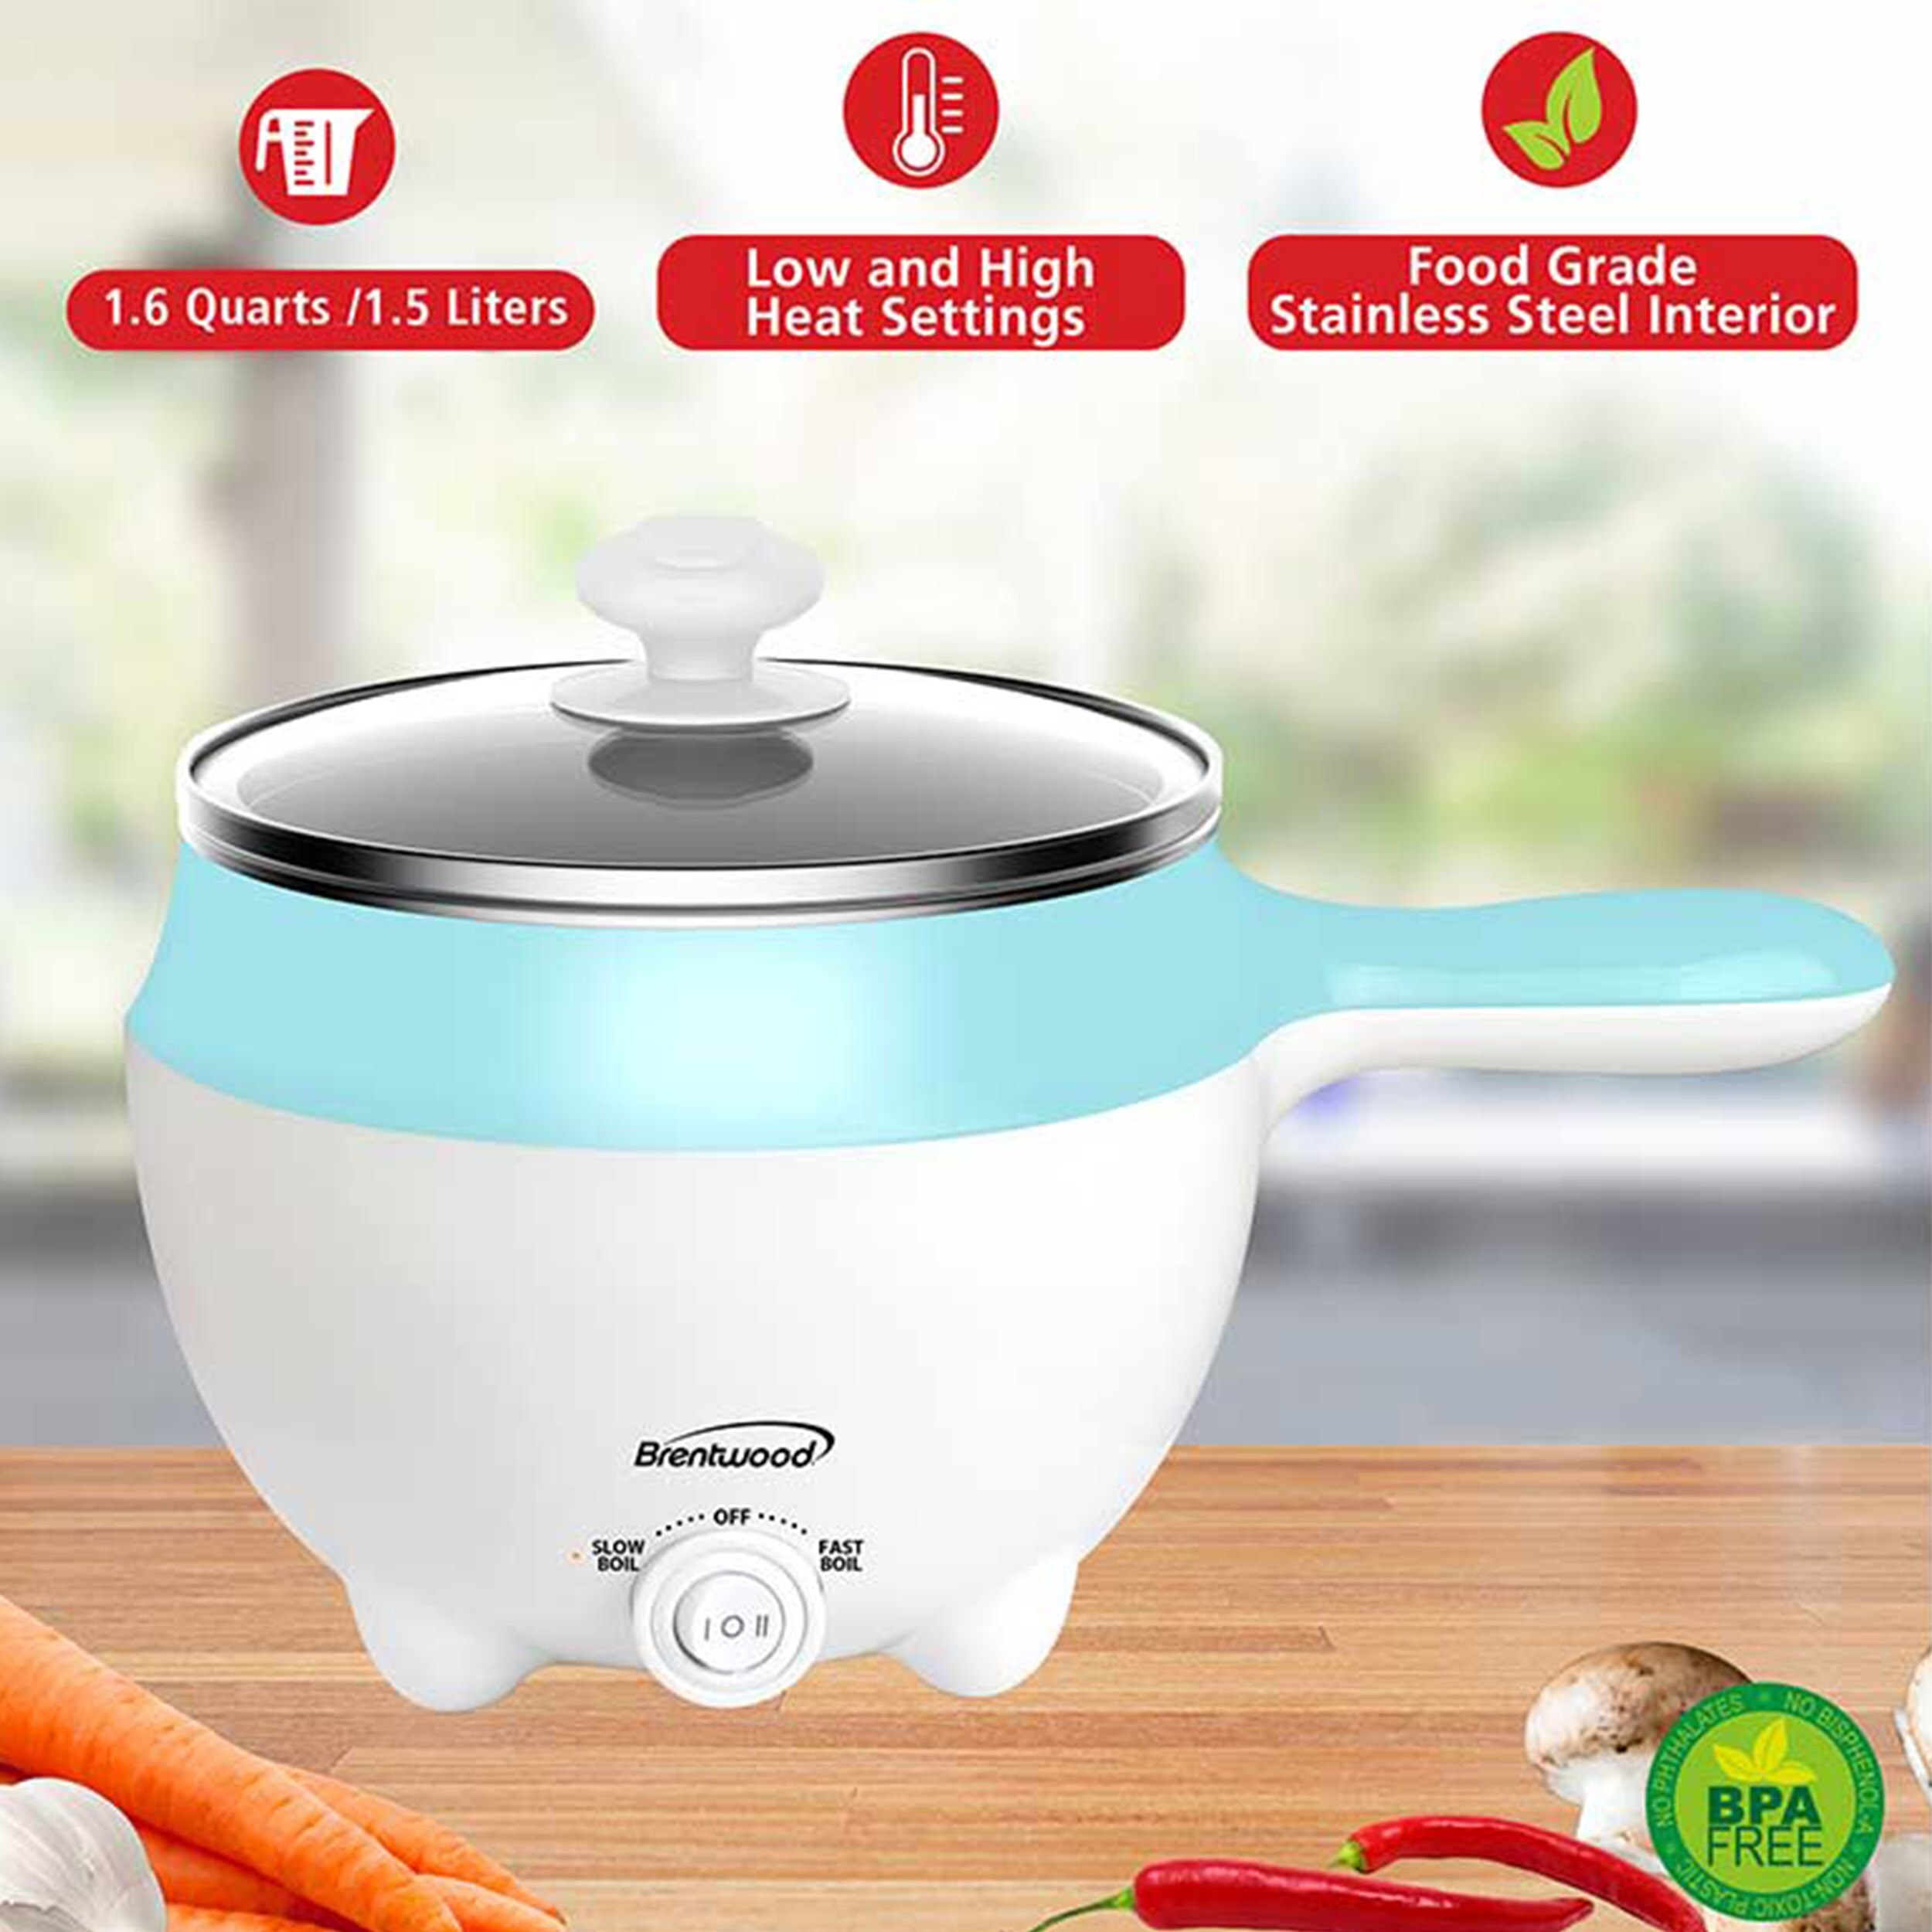 https://ak1.ostkcdn.com/images/products/is/images/direct/fb5811110cc471b3c4874def6d41333695361fc2/Brentwood-Stainless-Steel-1.6qt-Electric-Hot-Pot-Cooker-and-Steamer.jpg